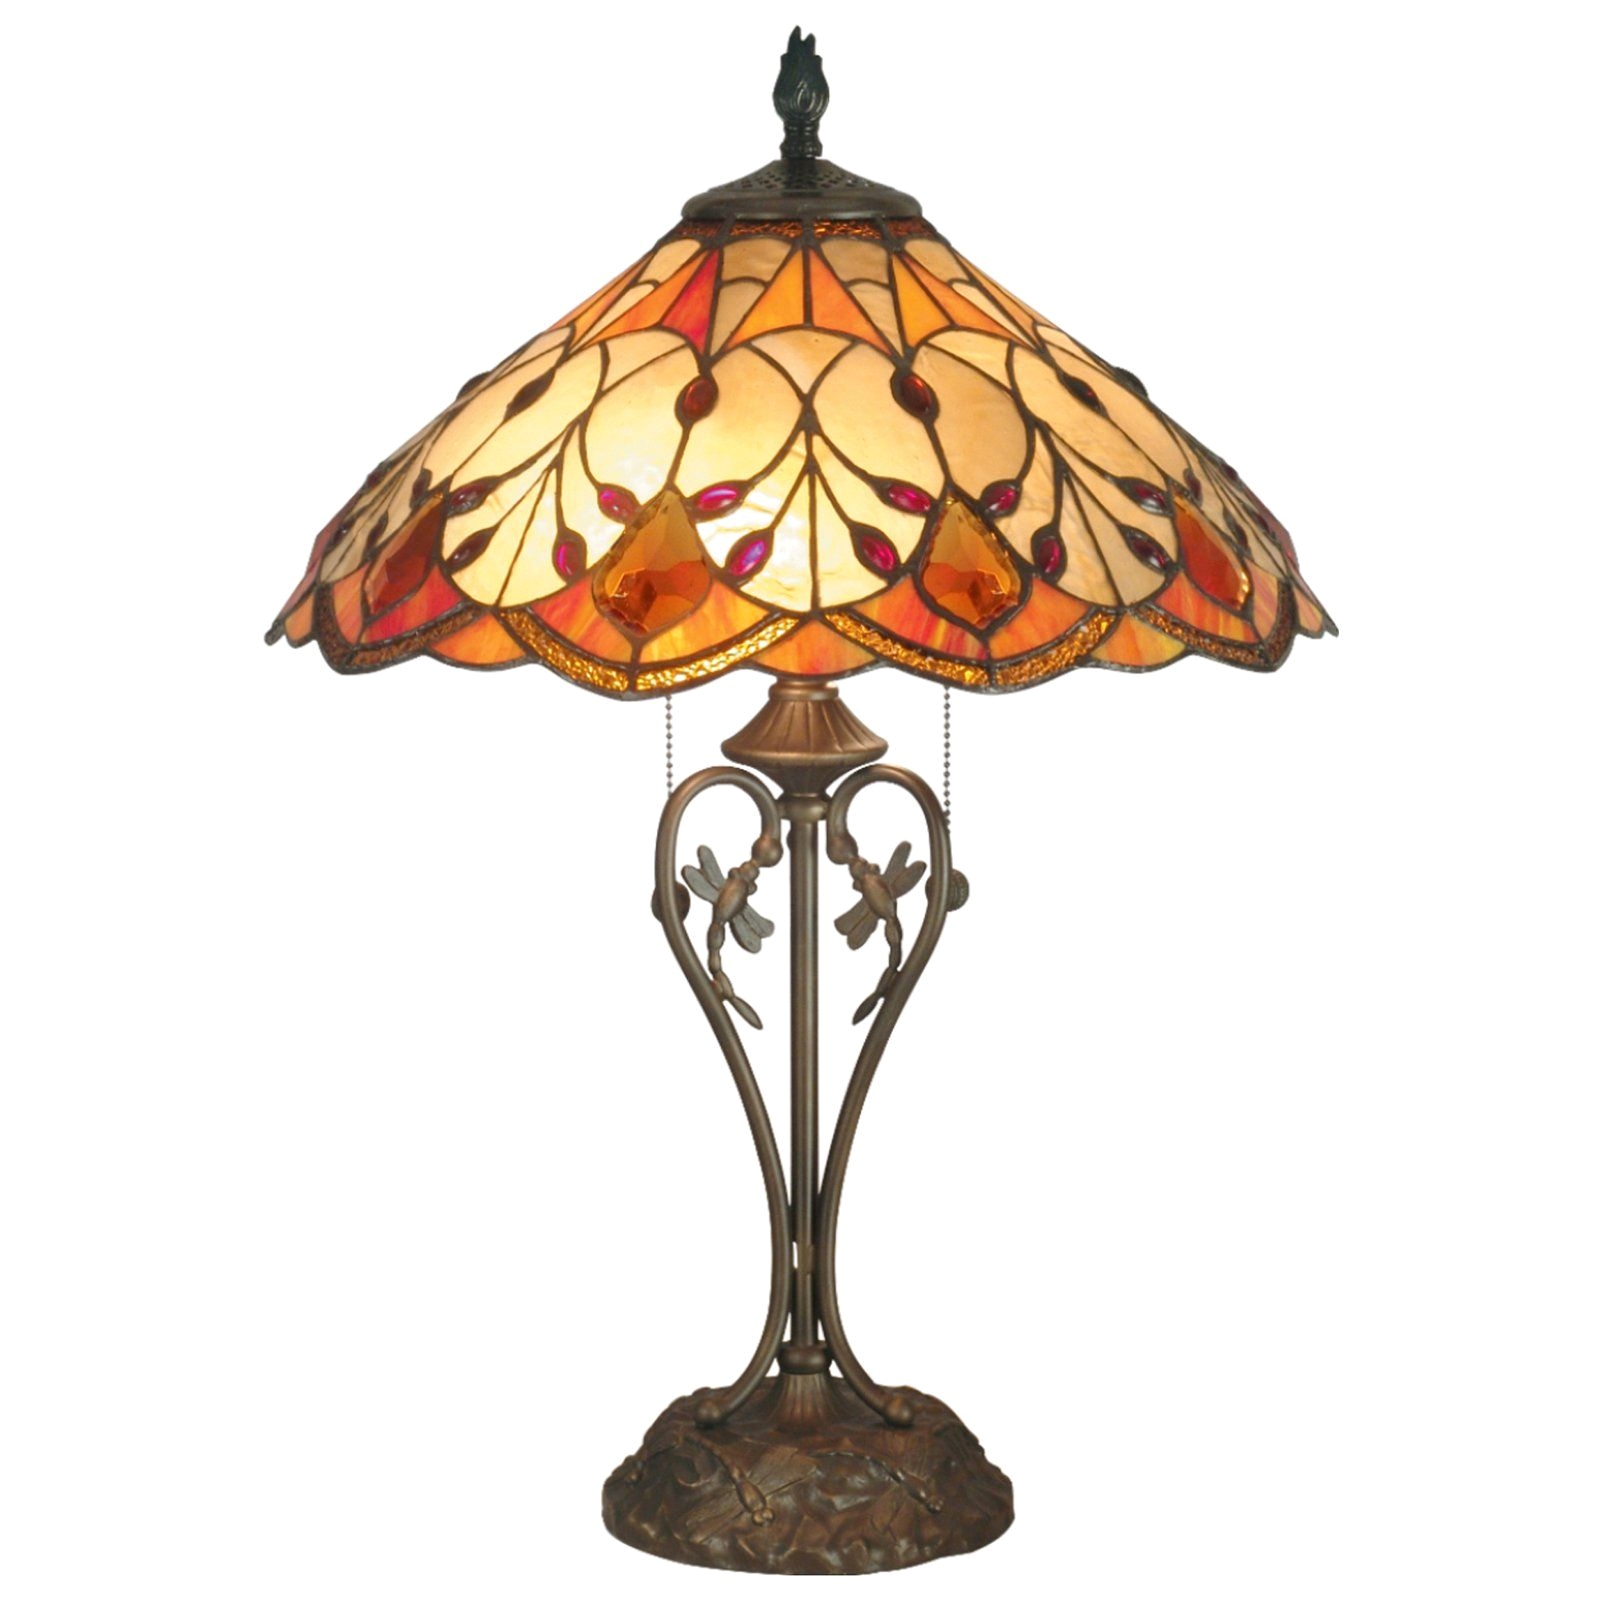 table lamps blue glass click visit link above to see more at lamps are decorative and functional too stained glass lamp table lamp old table lamps for